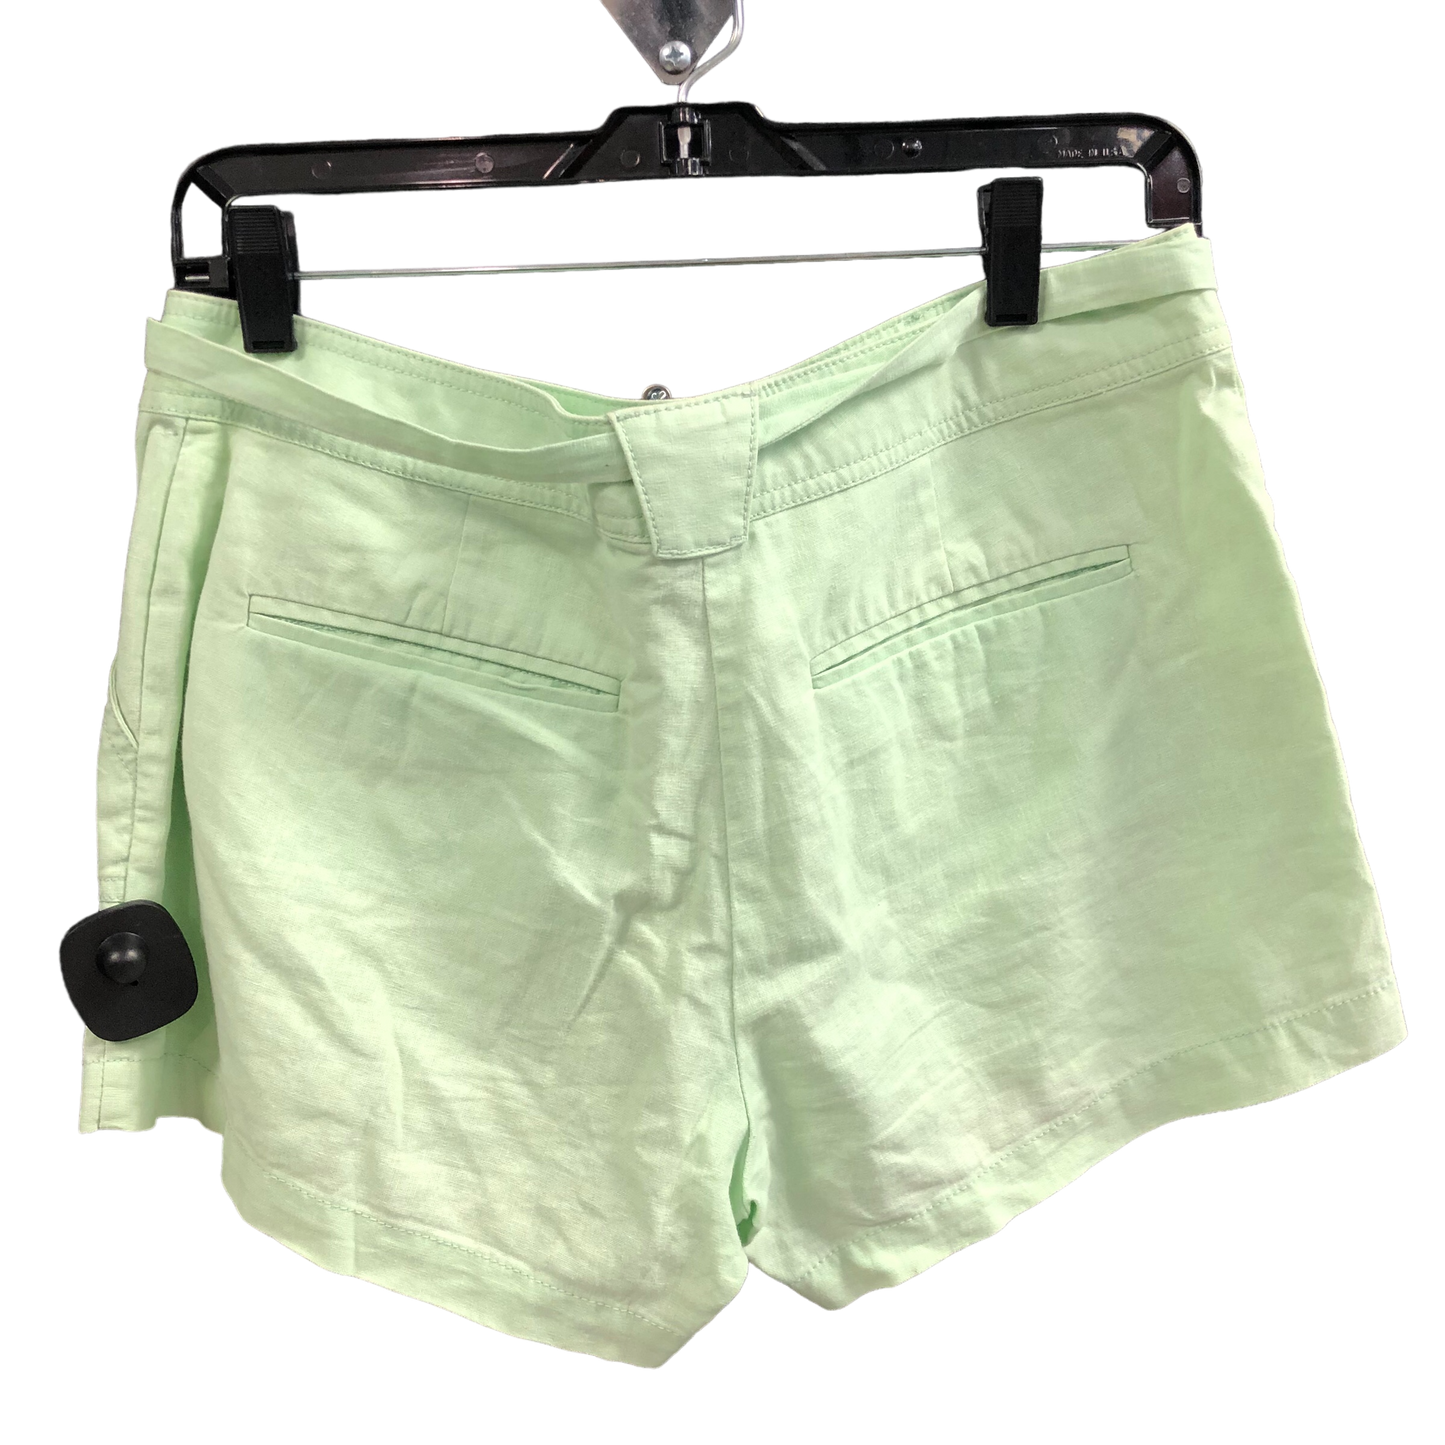 Green Shorts New York And Co, Size S